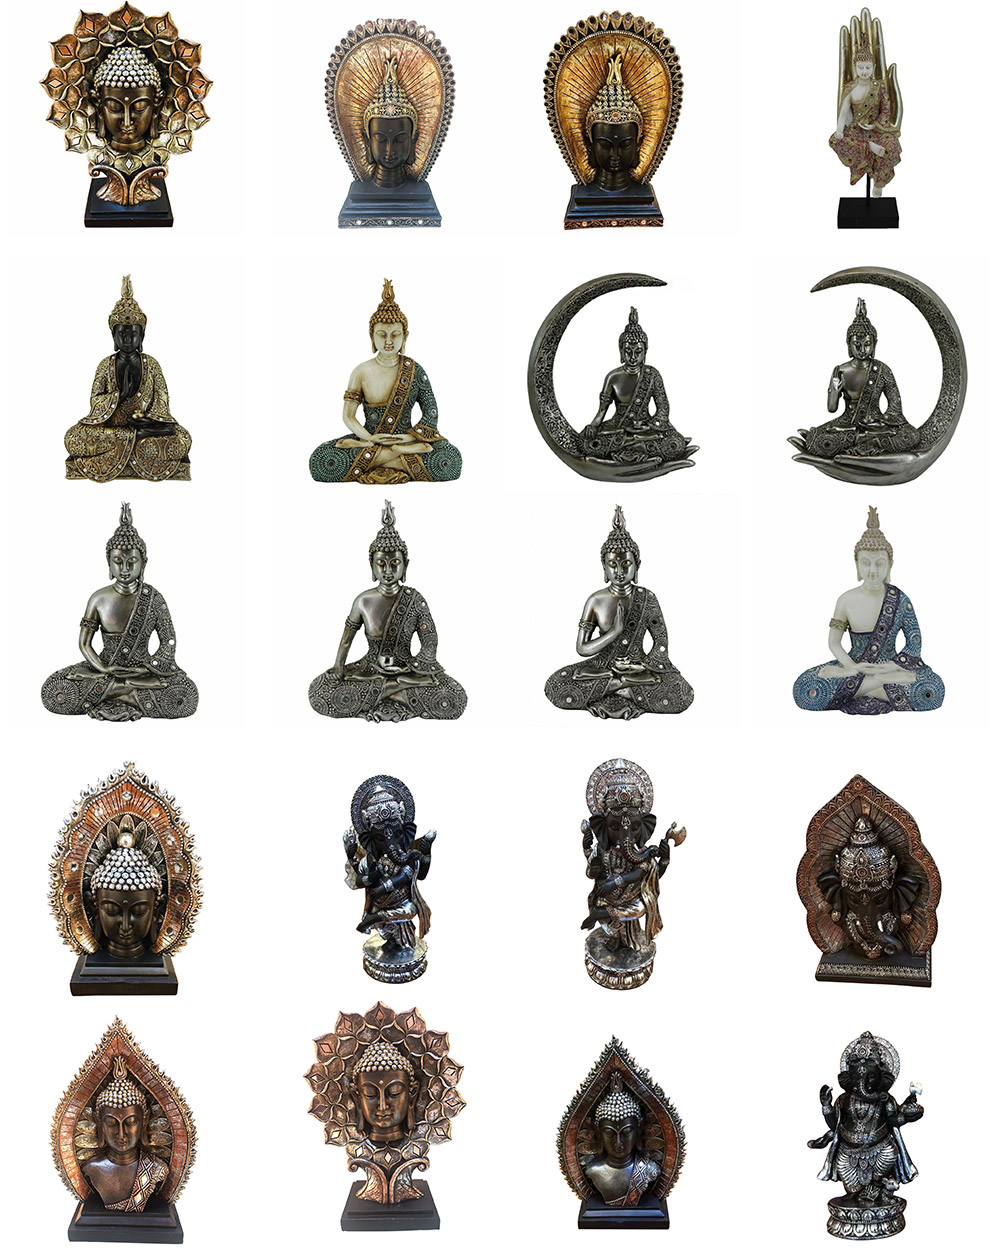 Wholesale home fengshui decor resin craft, Thai Lord God Elephant Buddha Statue with halo